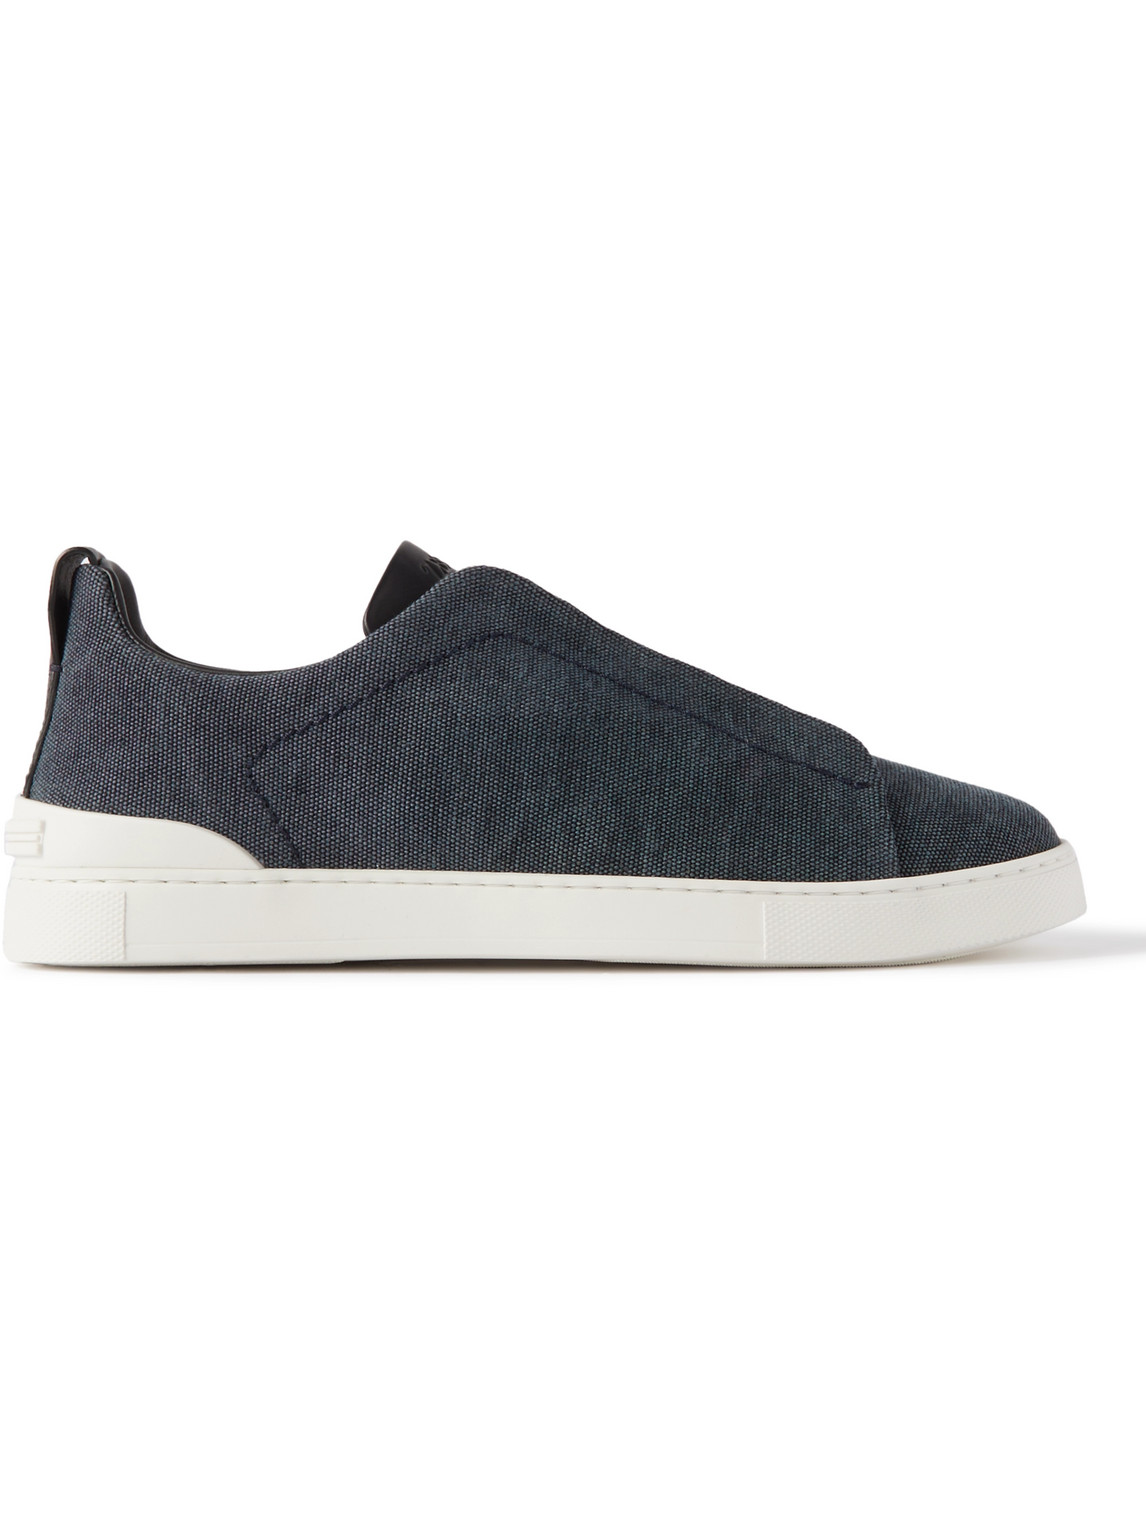 Zegna Canvas Slip-on Sneakers In Blue